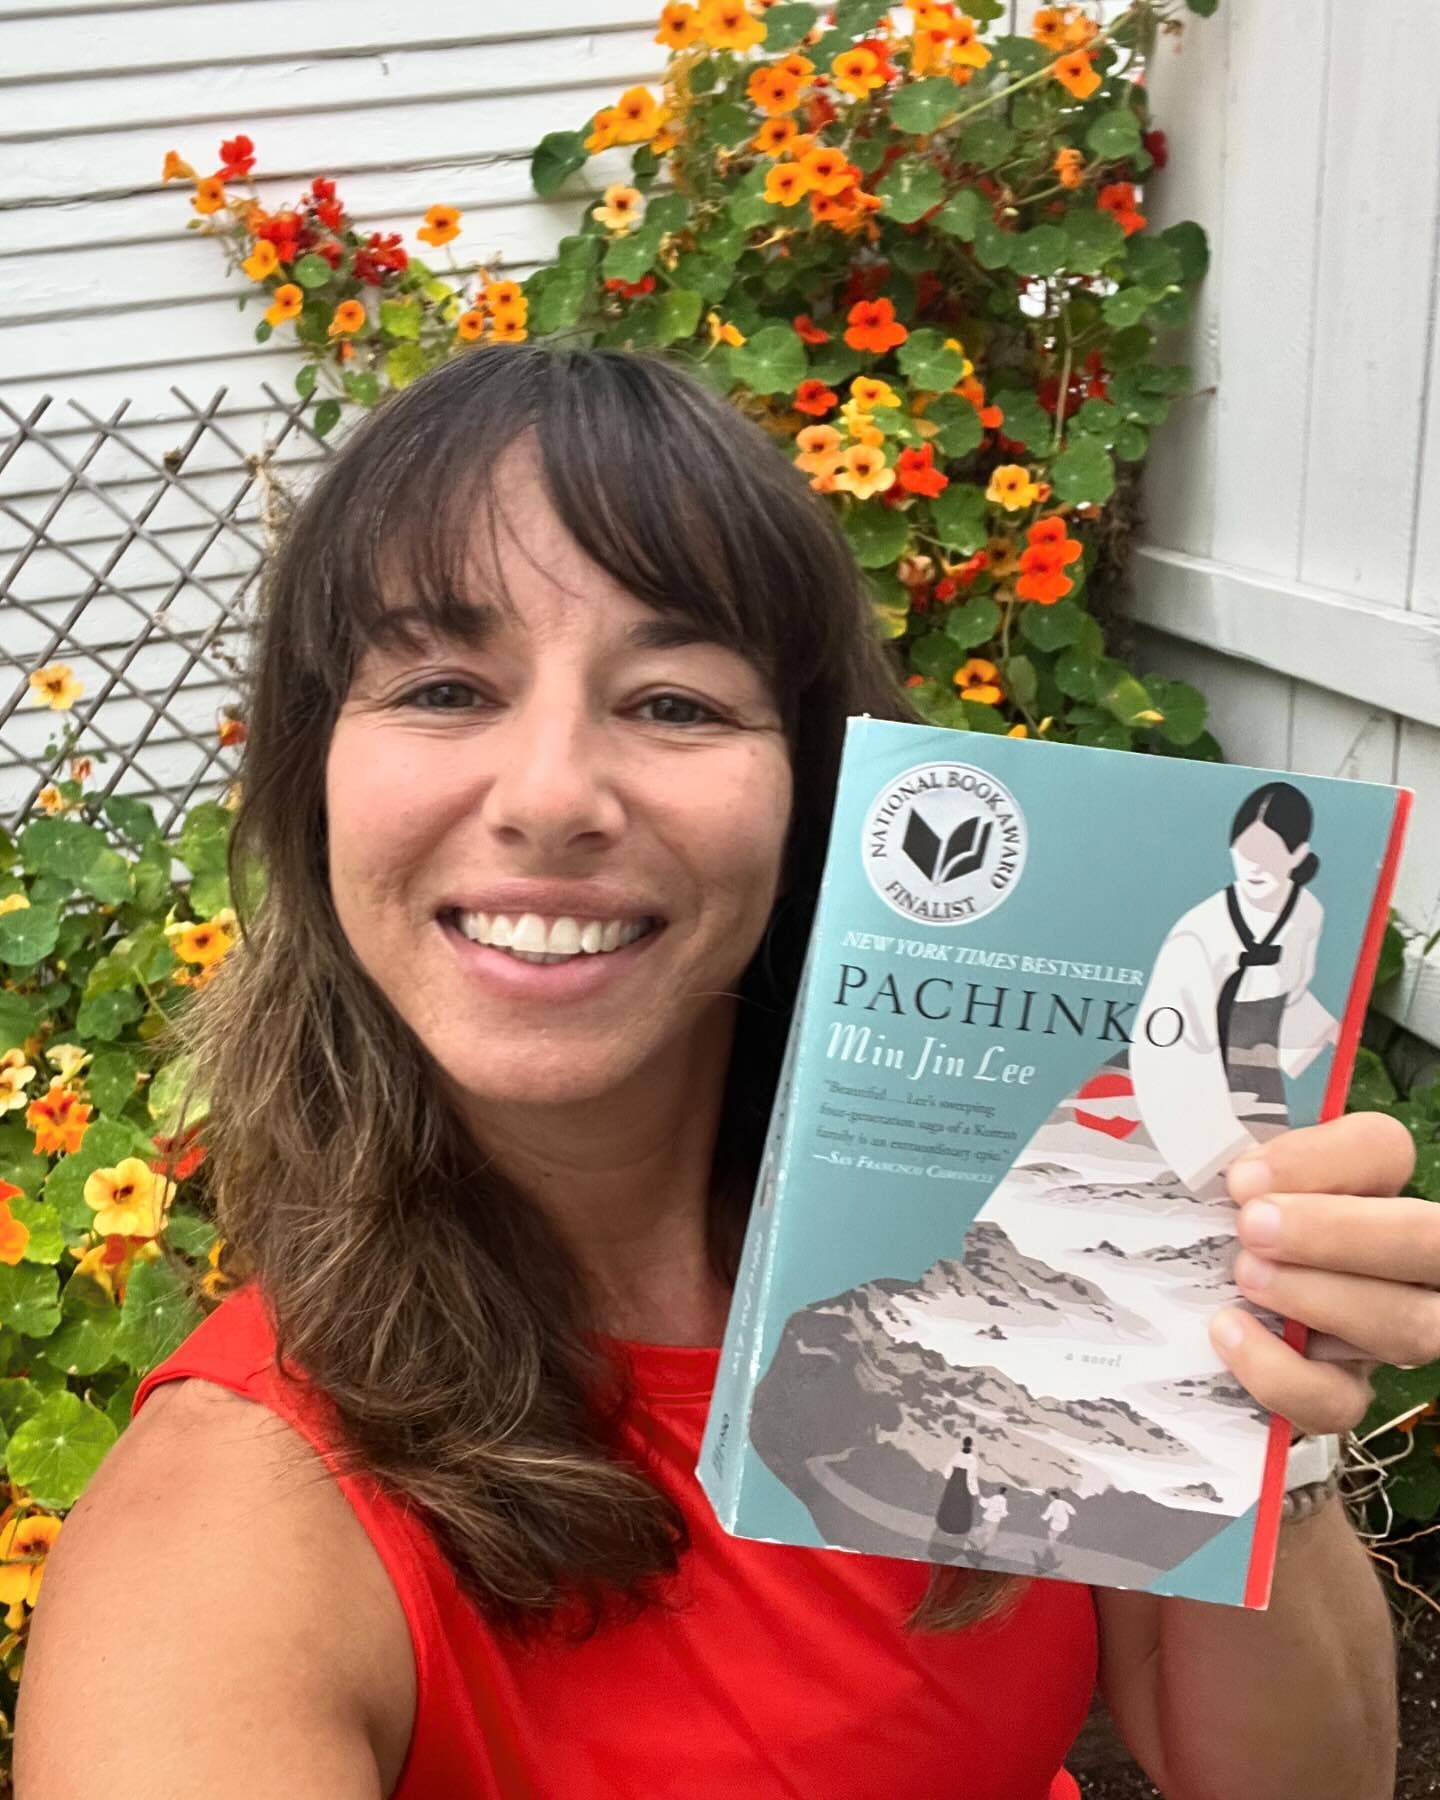 Our May Book Club pick is &ldquo;Pachinko&rdquo; by Min Jin Lee. 

Read along from home or join our discussion on May 20th at 5pm at Bay Club Carmel Valley! 📖